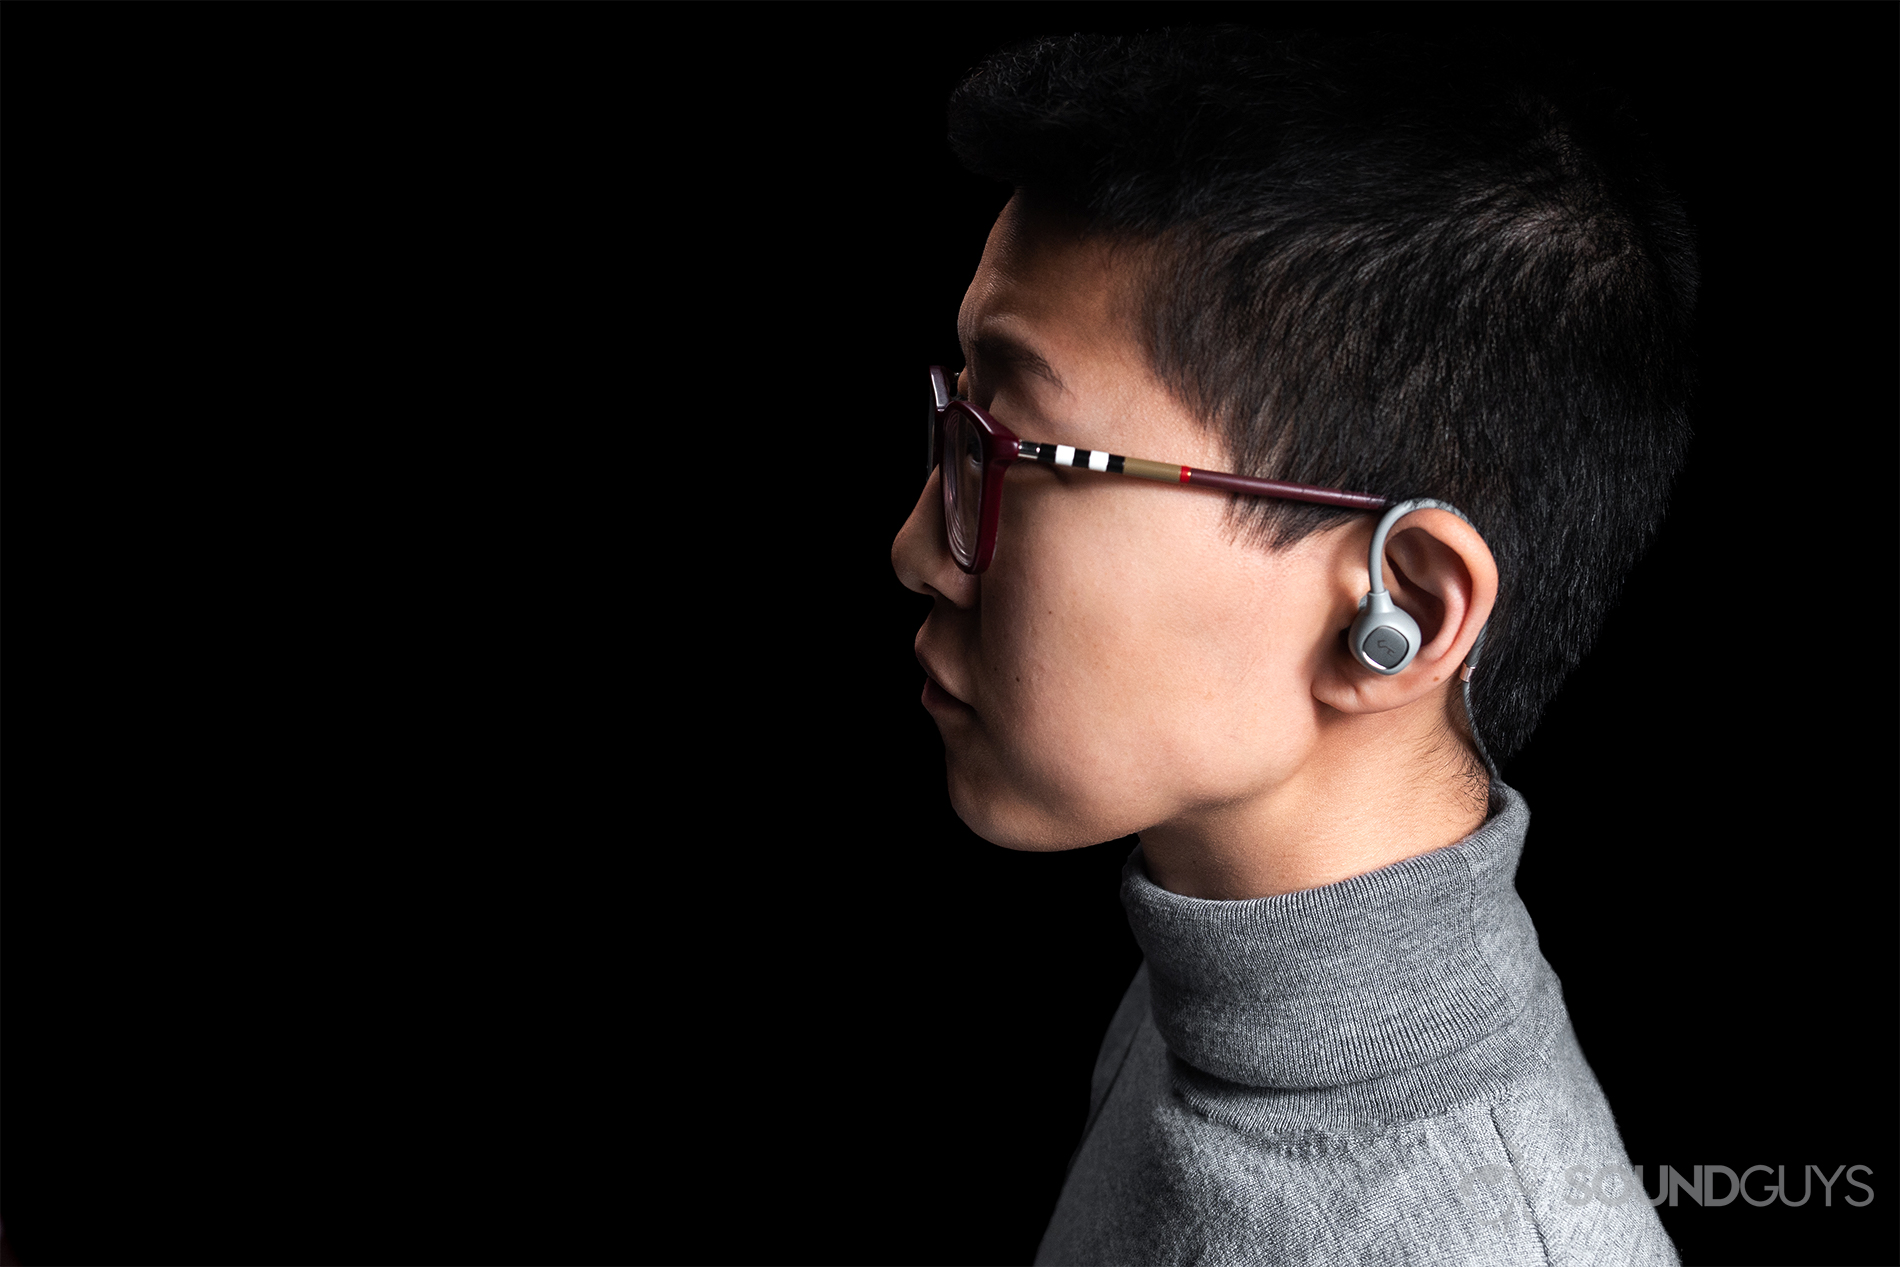 Aukey EP-B80: A woman wearing the Aukey EP-B80 wireless earbuds against a black background.